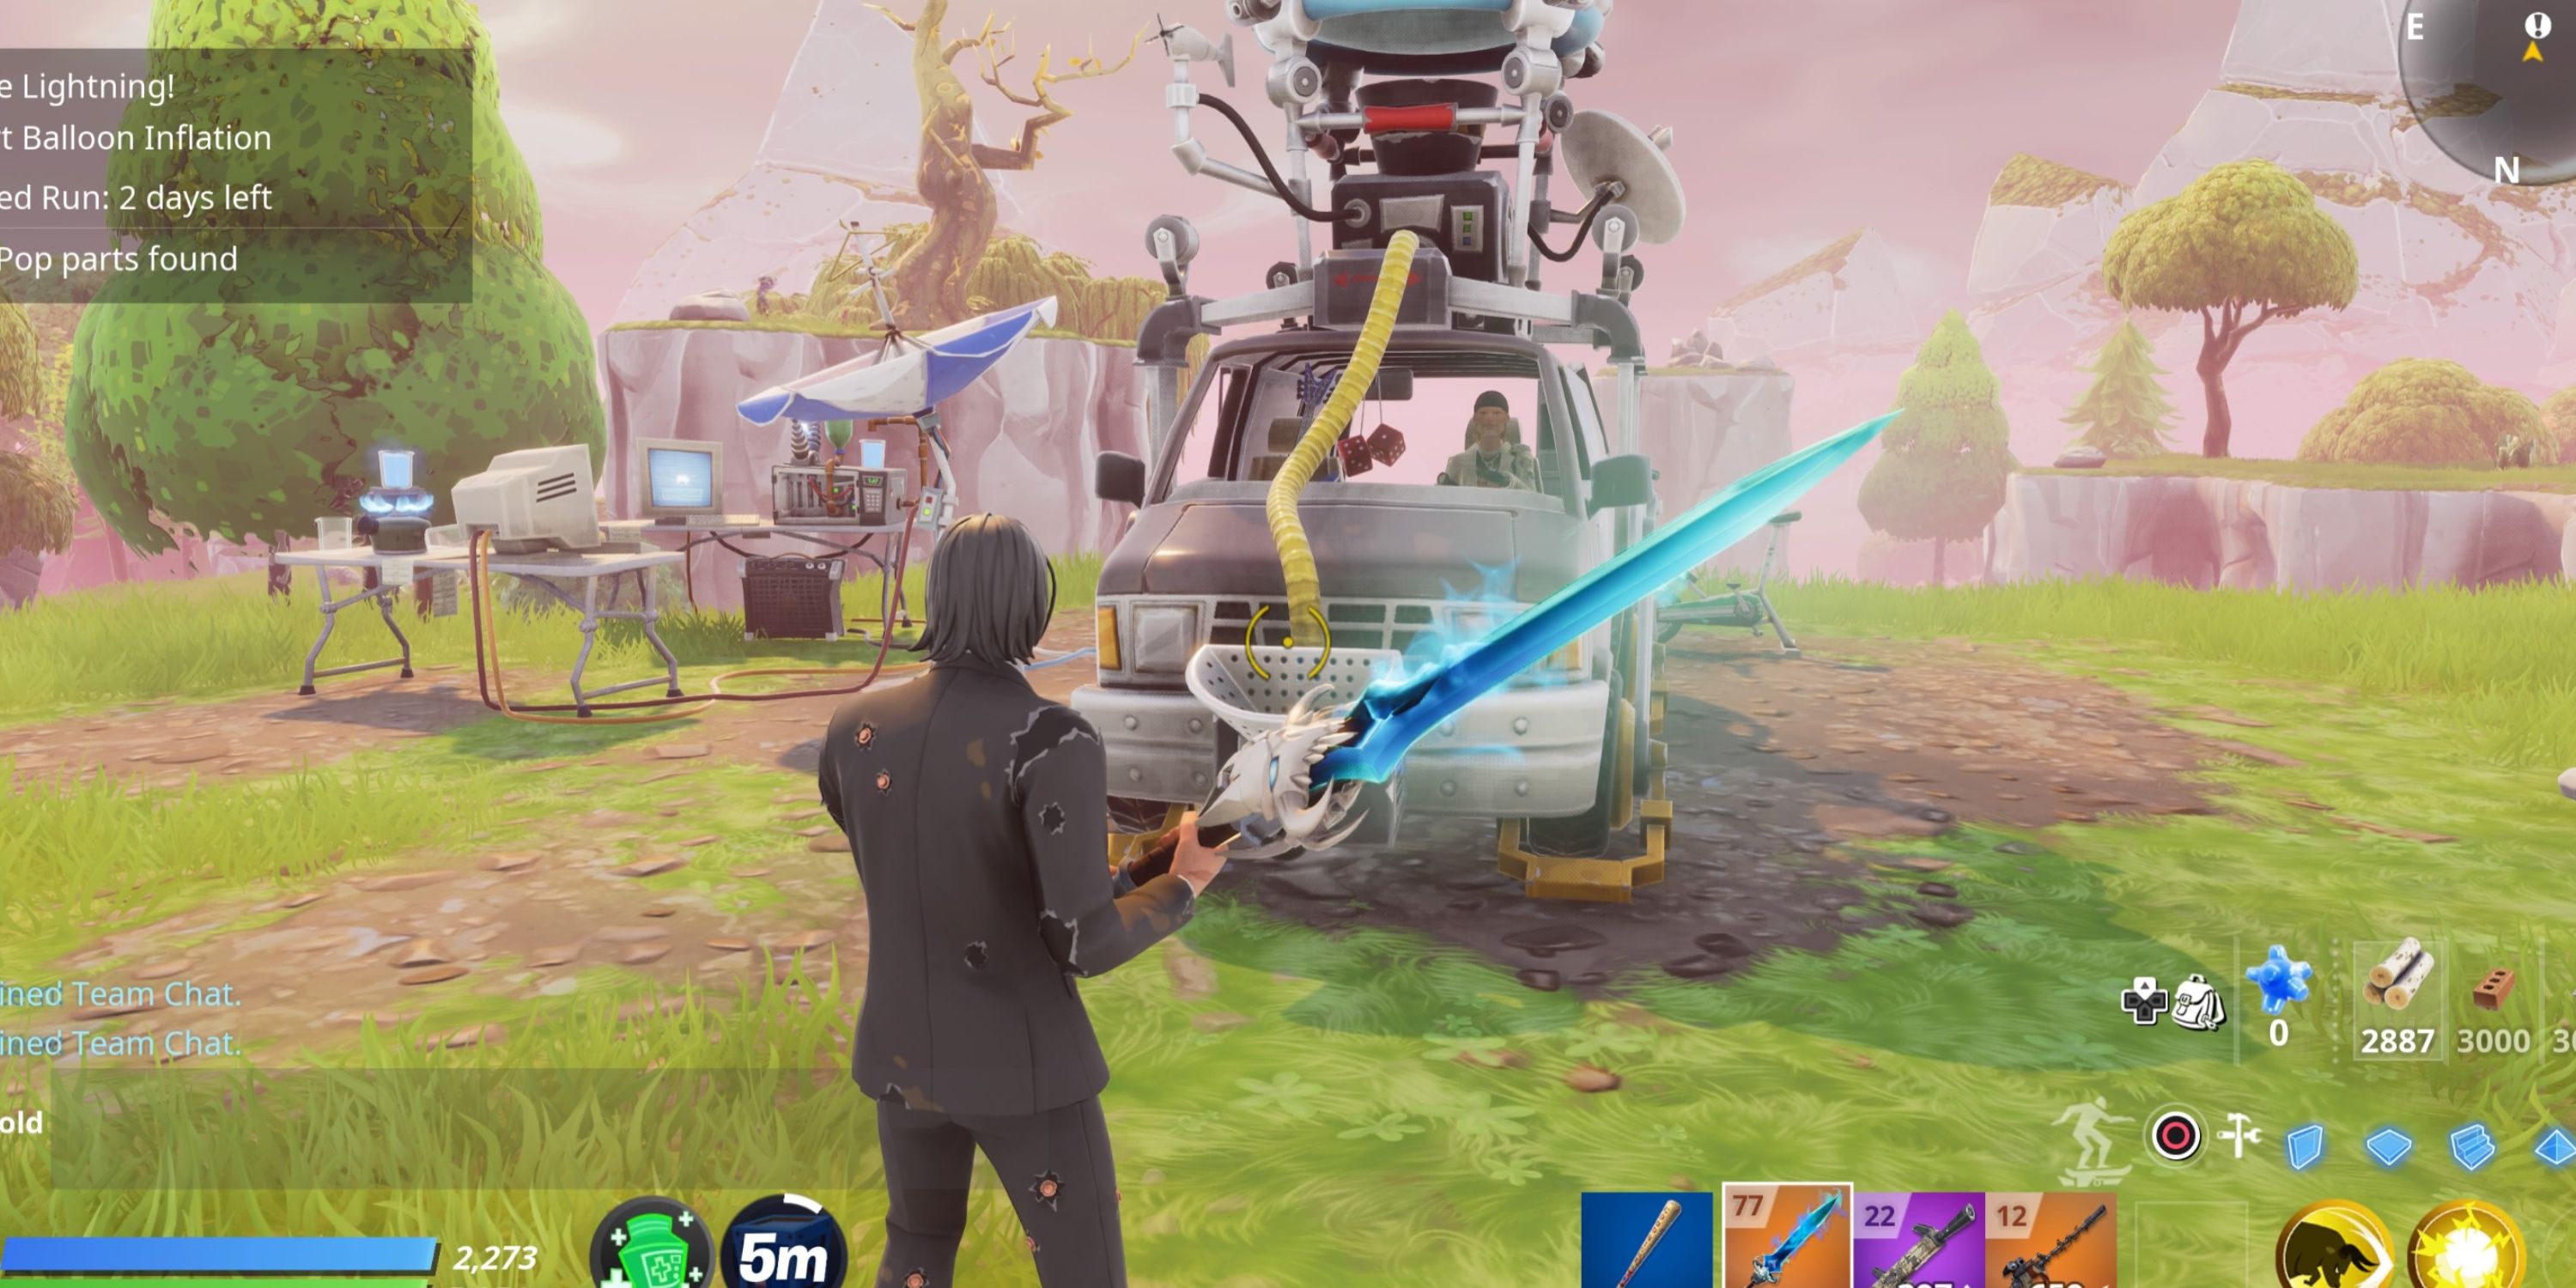 john wick with a sword with lars research van